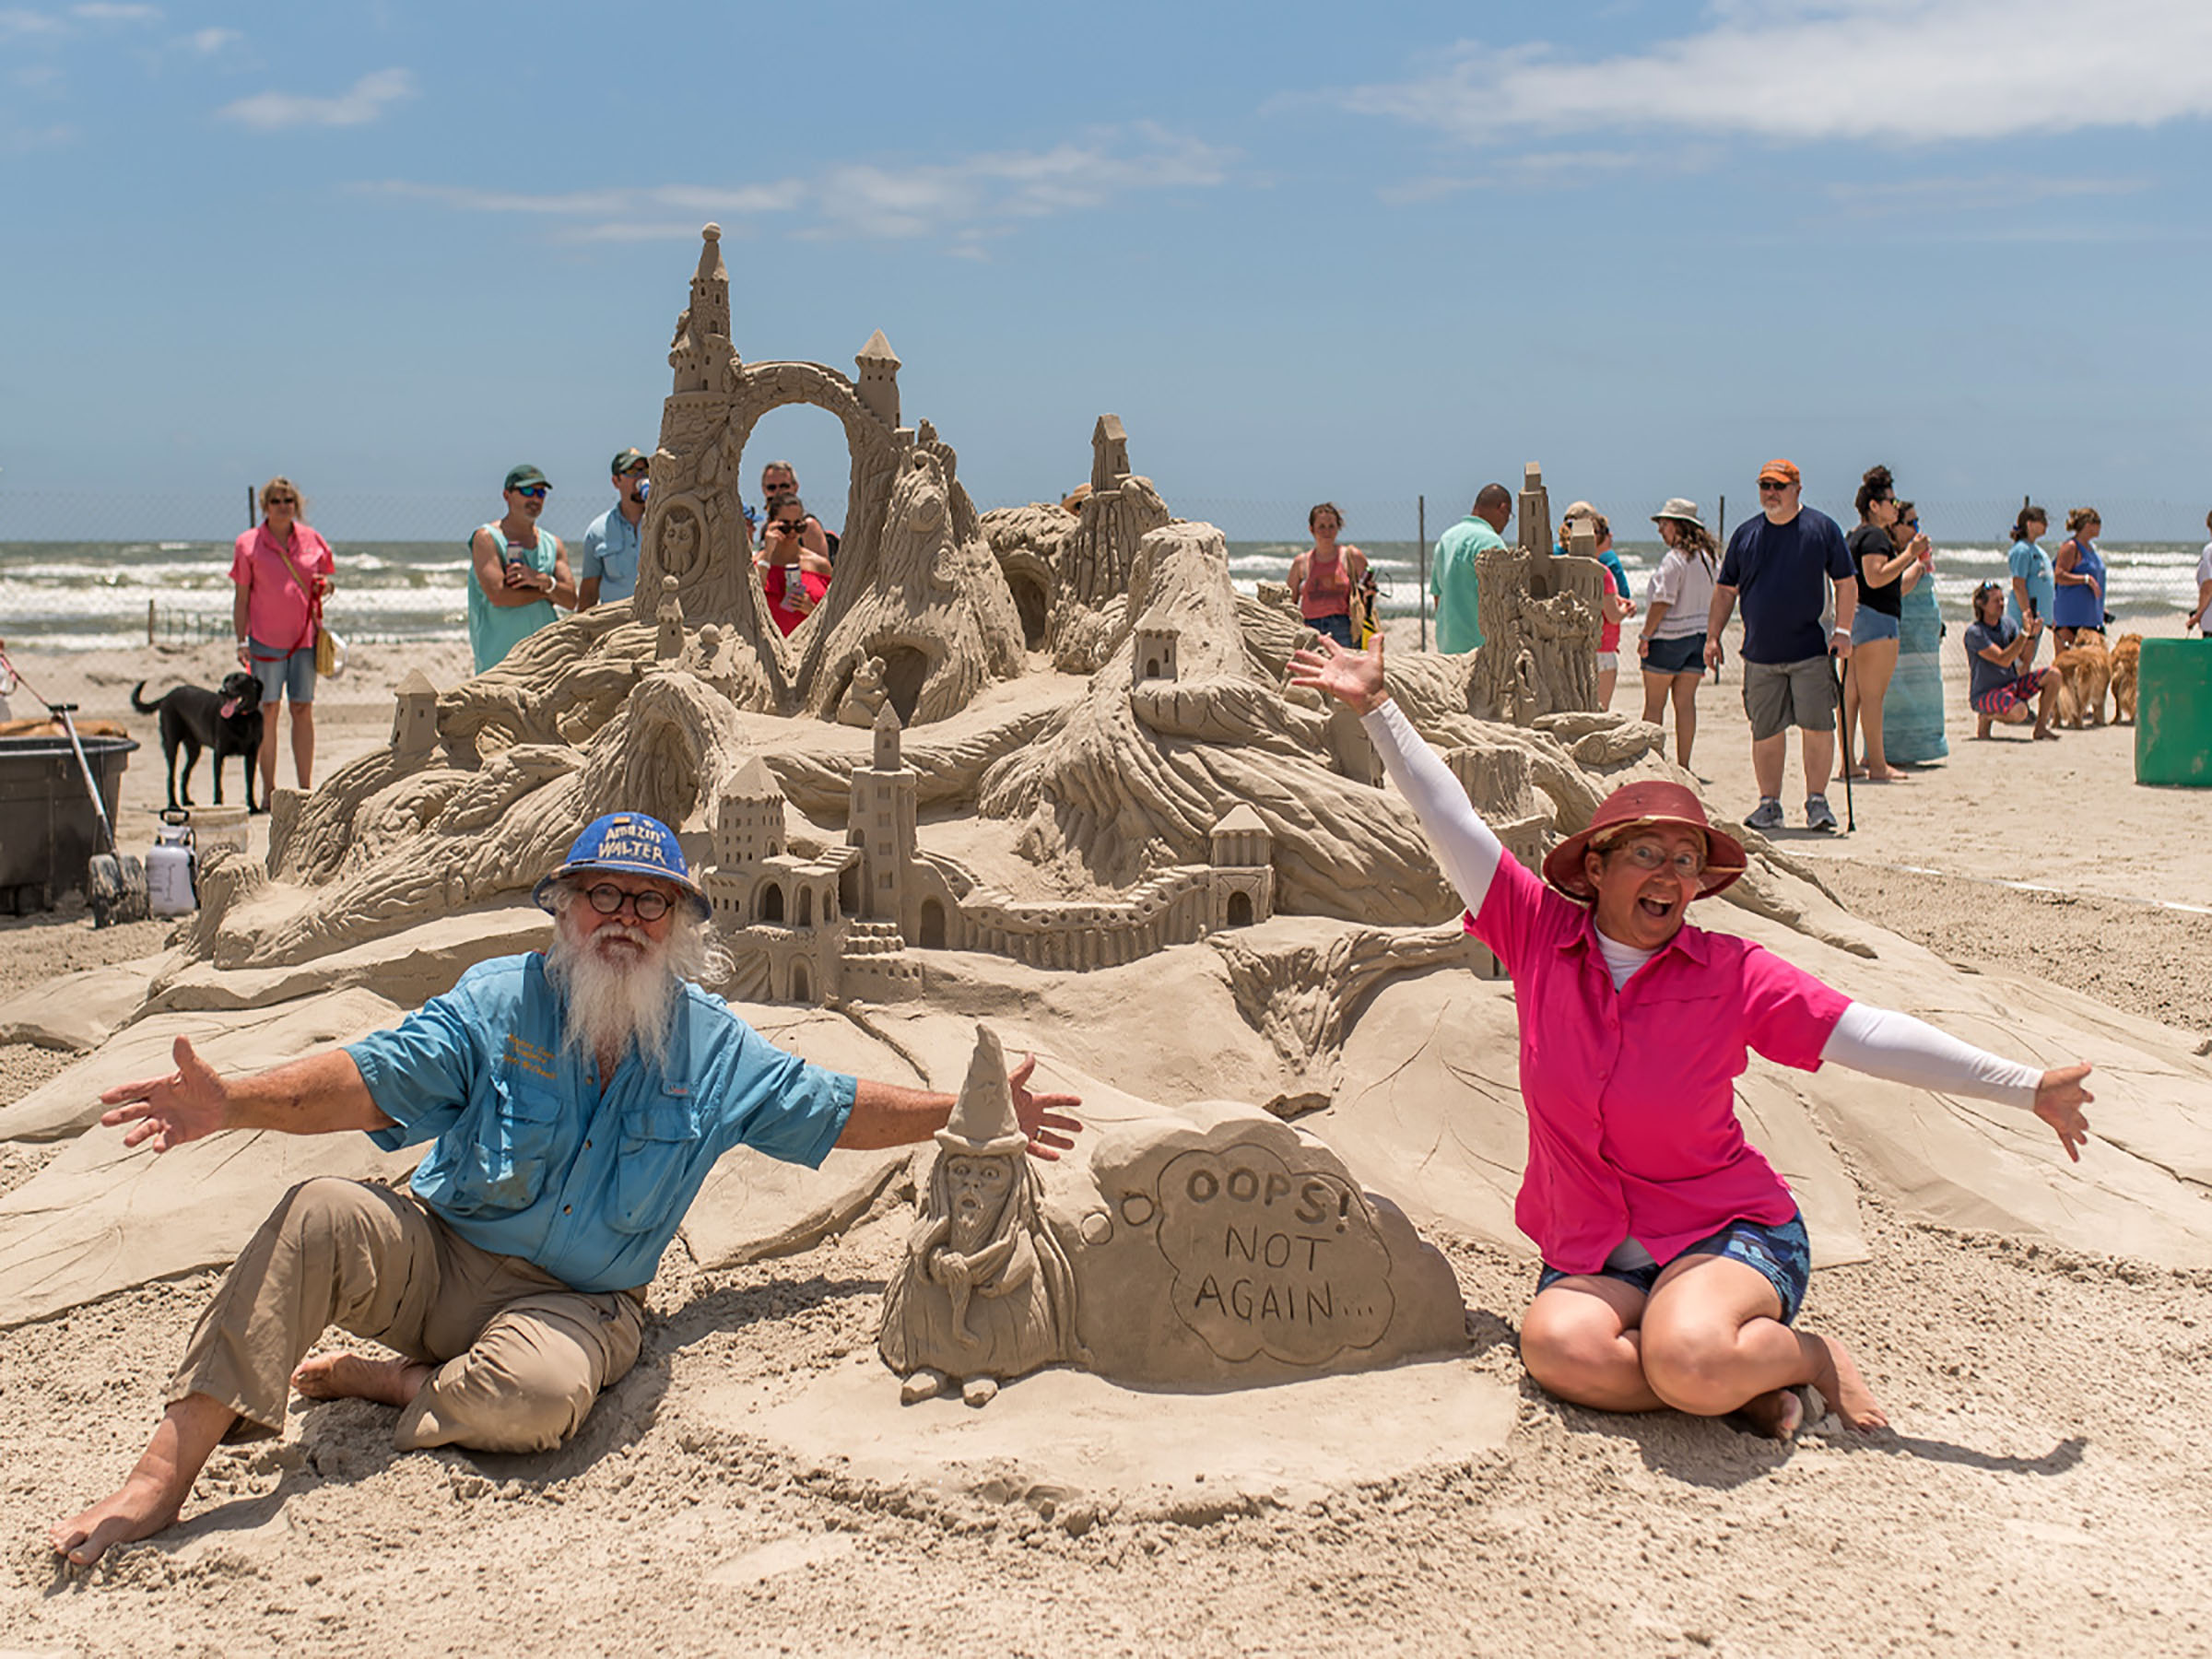 A picture of two people sitting in the sand with their arms outstretched in front of an elaborate sand castle design with gnomes, arches, pathways and signs